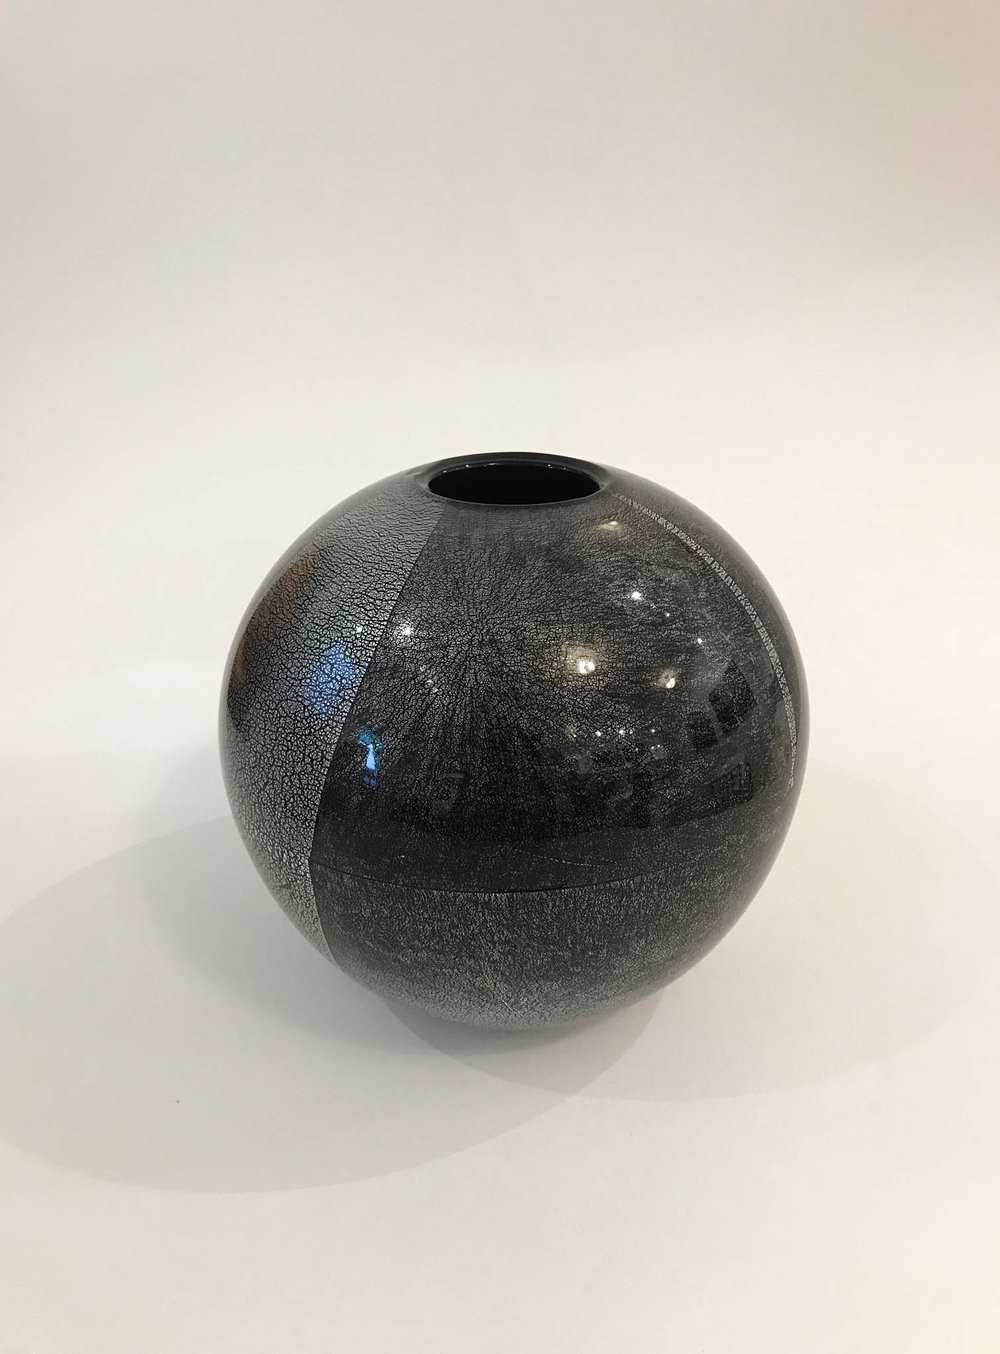 19 Unique Large Glass Ball Vase 2022 free download large glass ball vase of david benyosef 13forest gallery throughout orb vase hand blown black glass with silver leaf 6 1 2